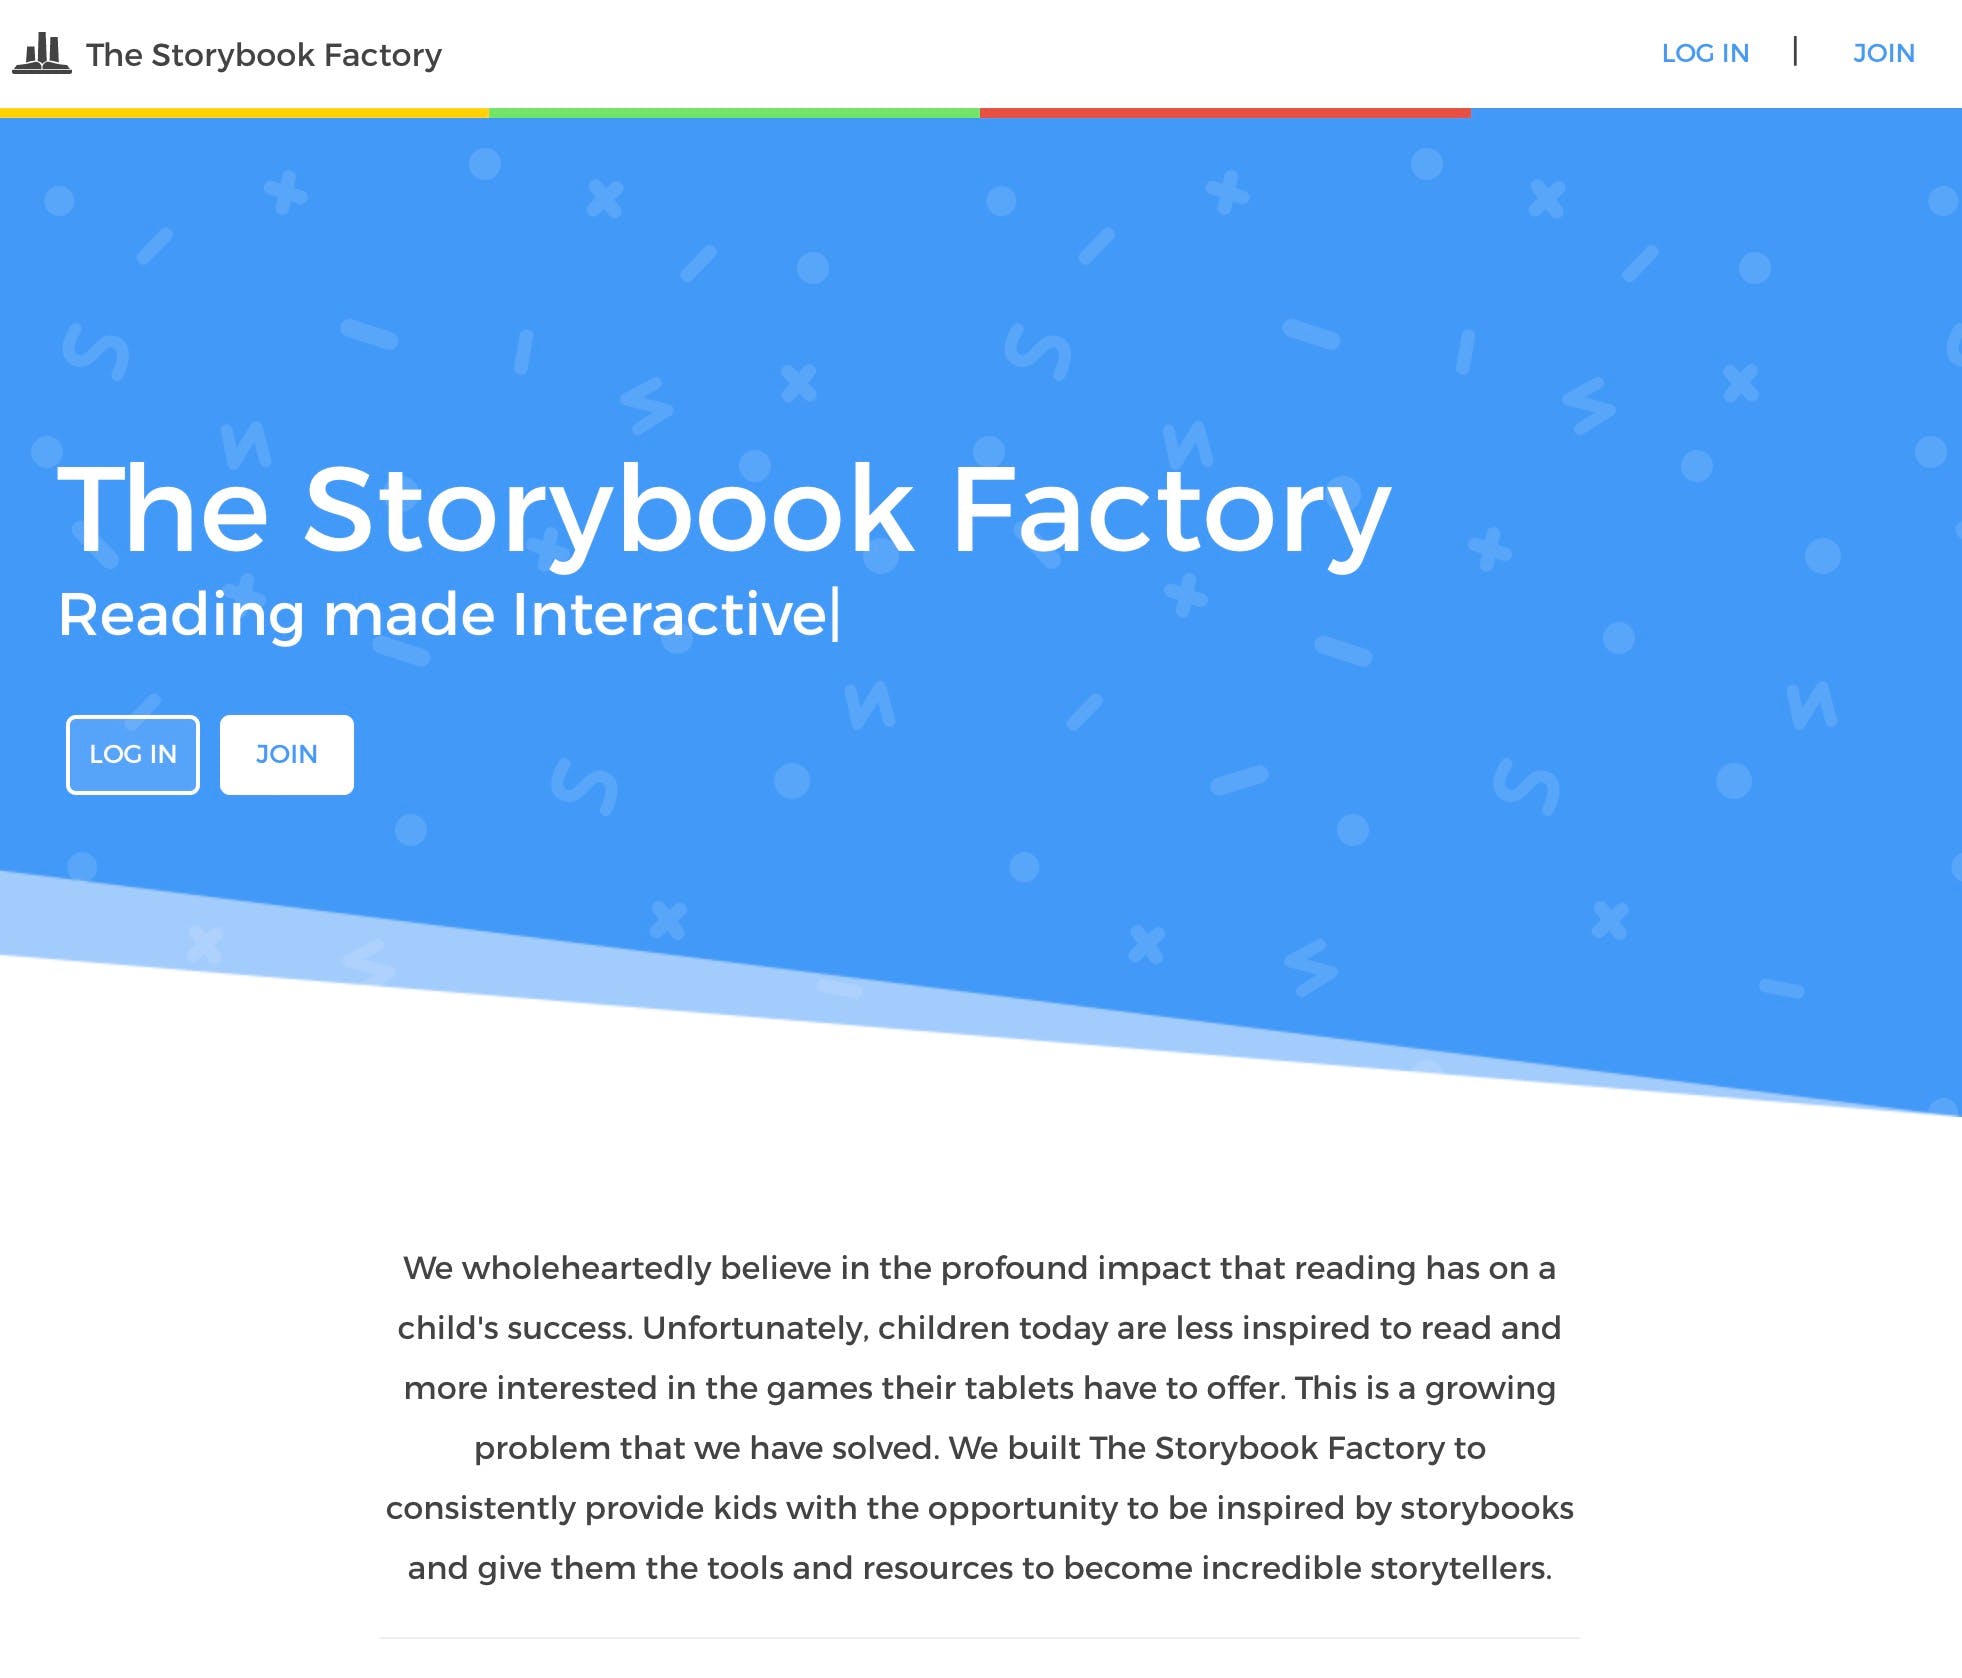 The Storybook Factory media 1